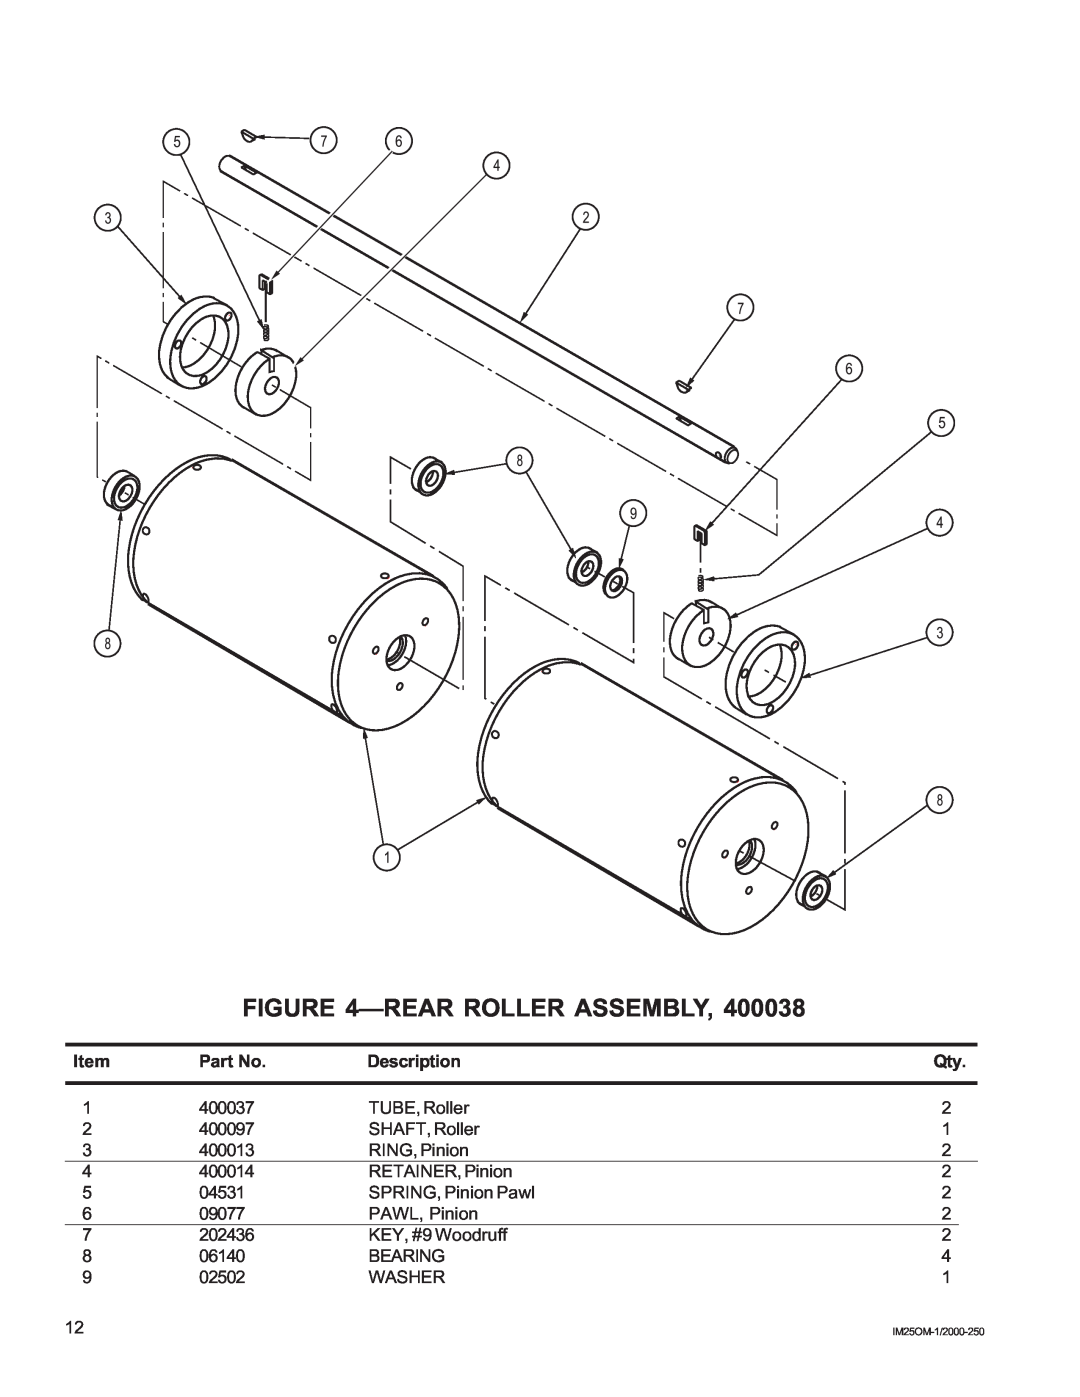 National Mower IM25 manual Rear Roller Assembly 